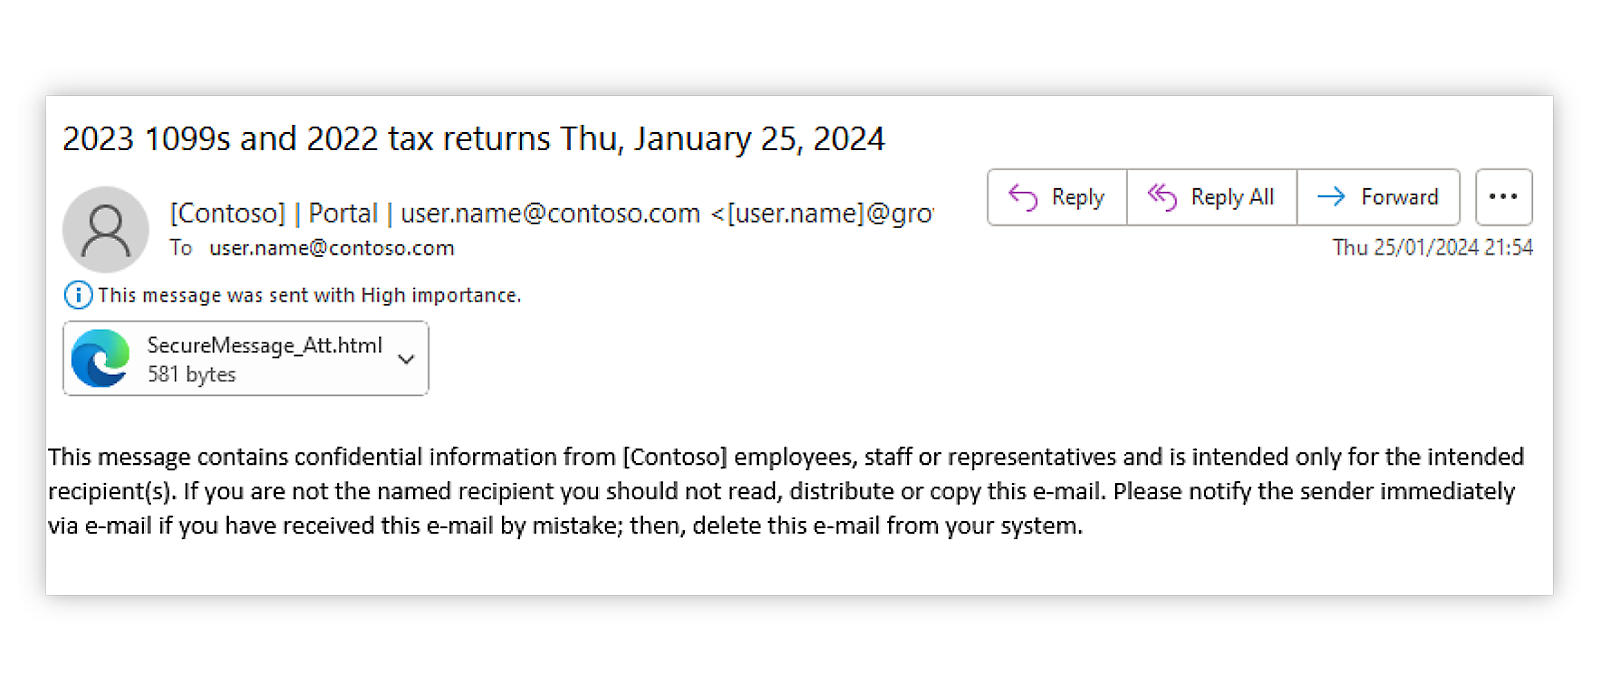 A tax season phishing email observed by Microsoft Threat Intelligence in January 2024. 